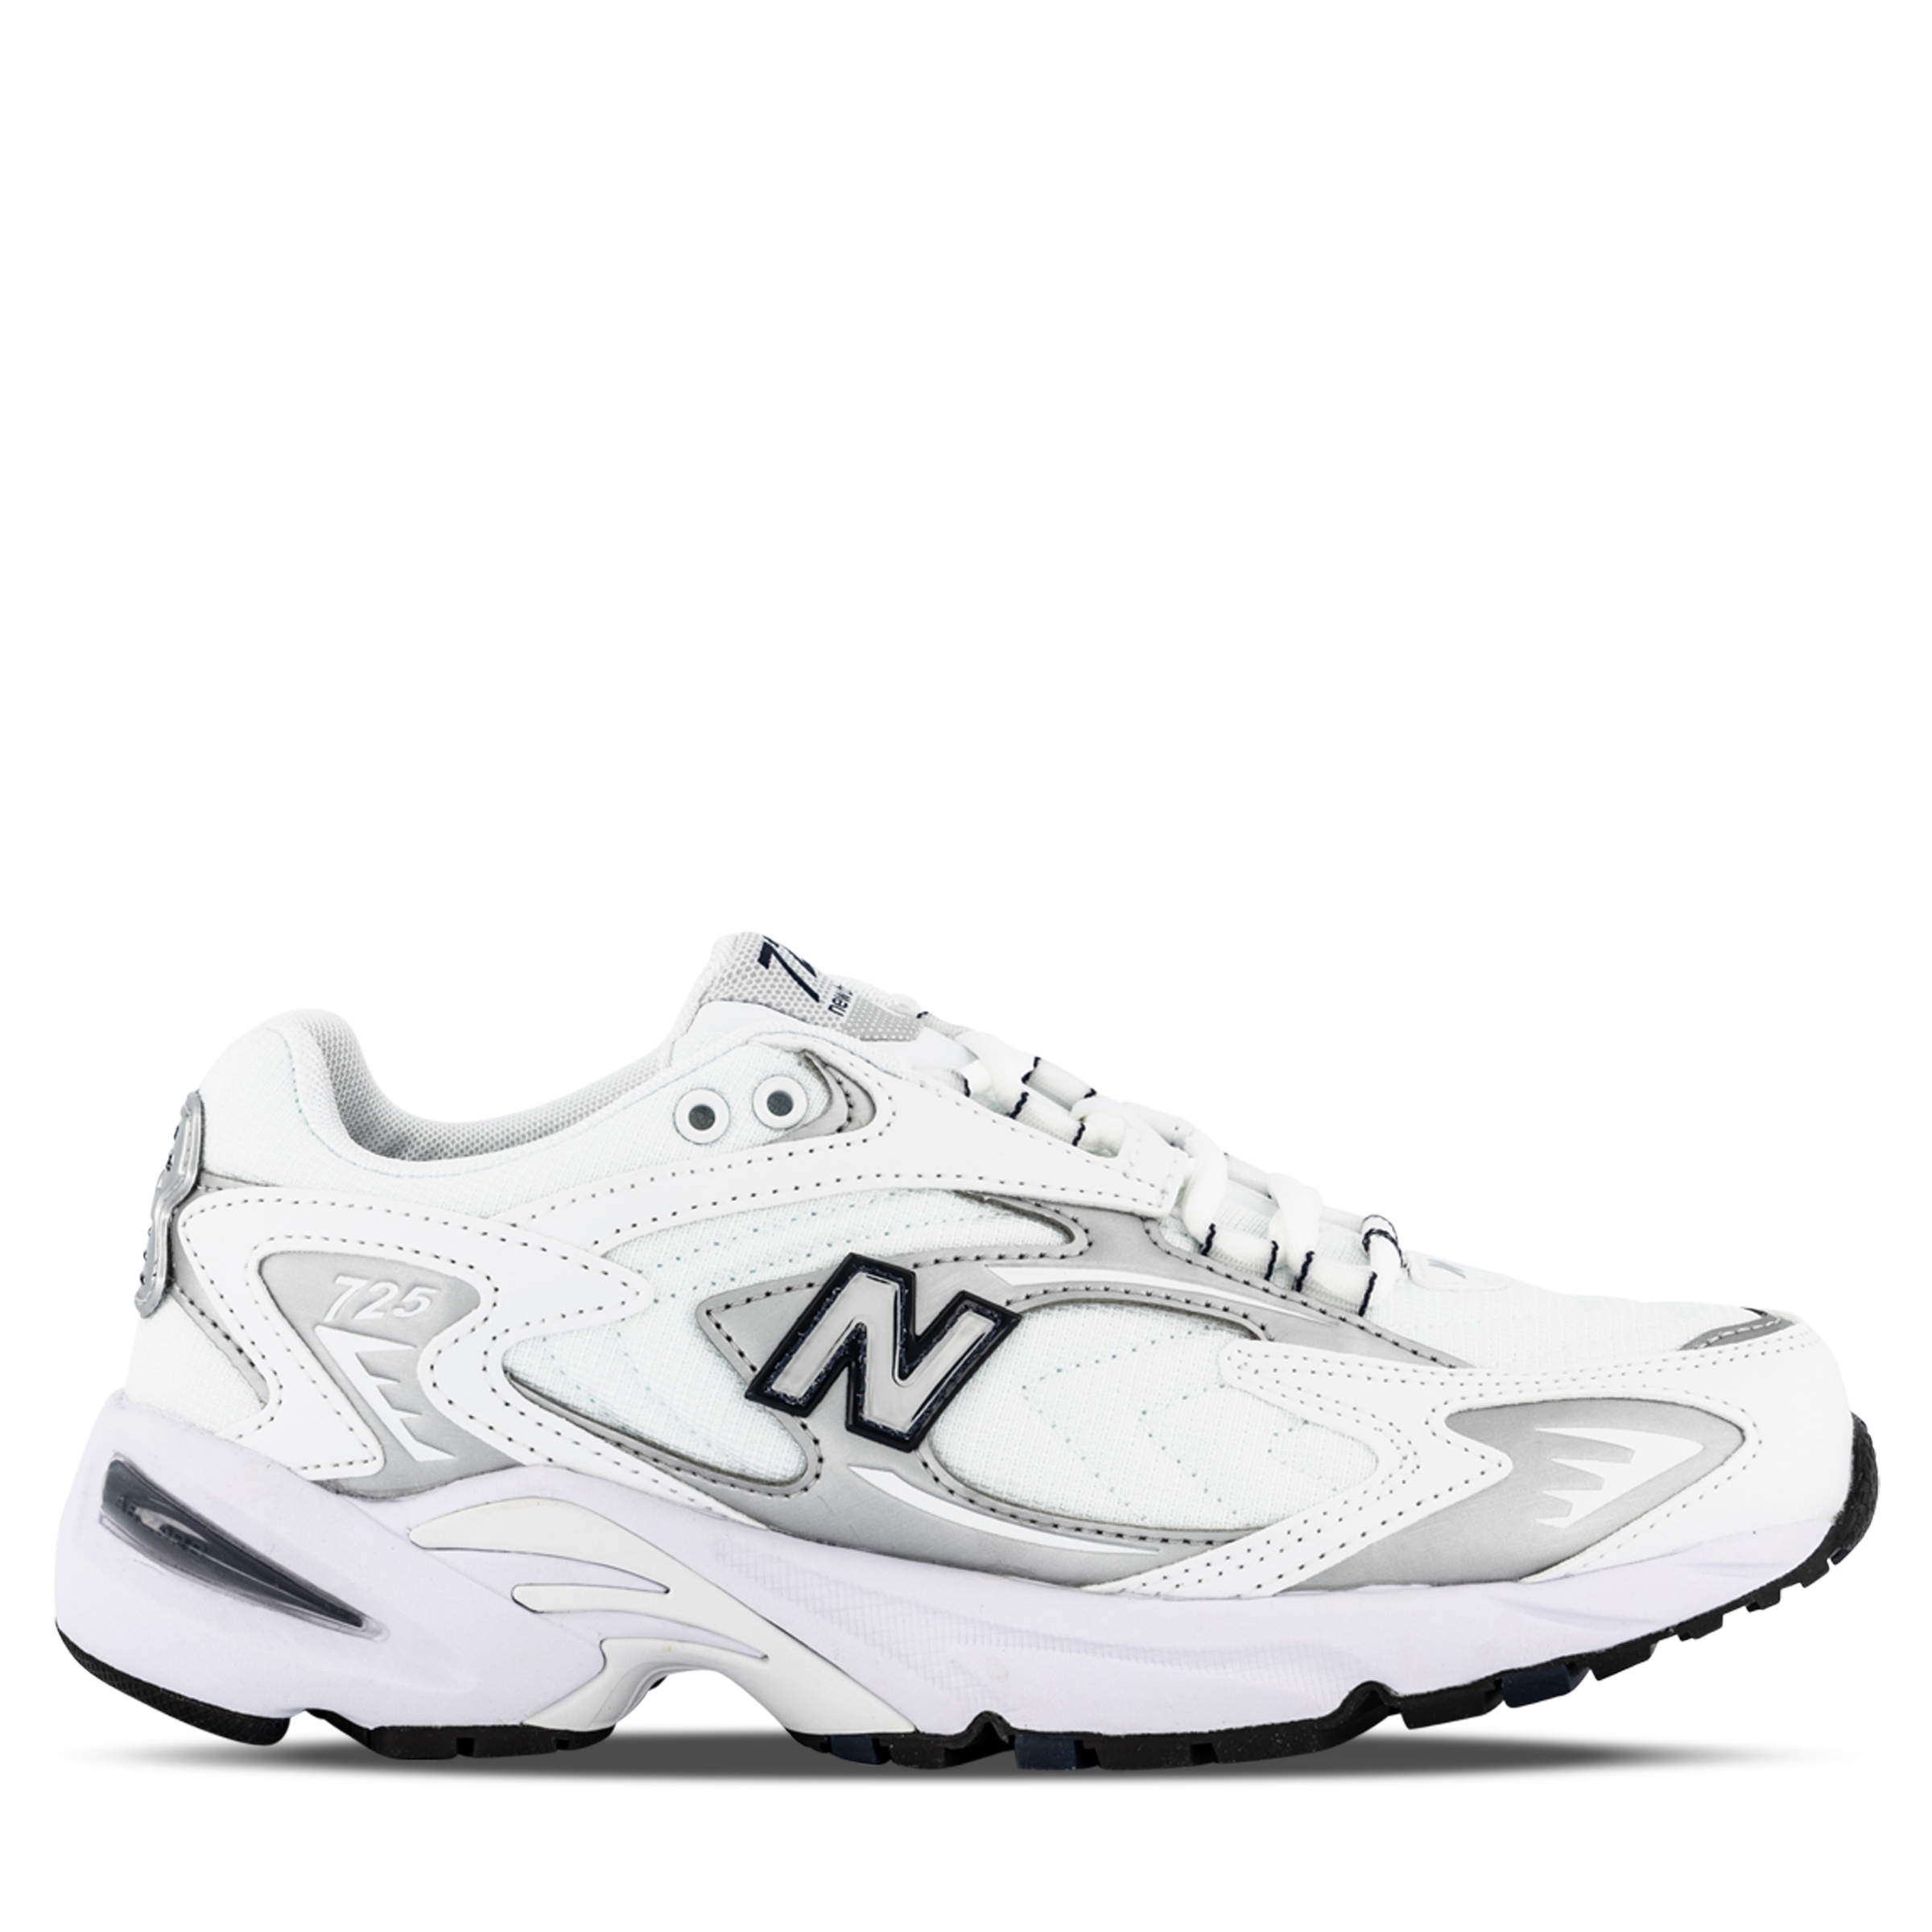 Signal Vandalize Messed up New Balance 725 Metallic Silver | Hype DC